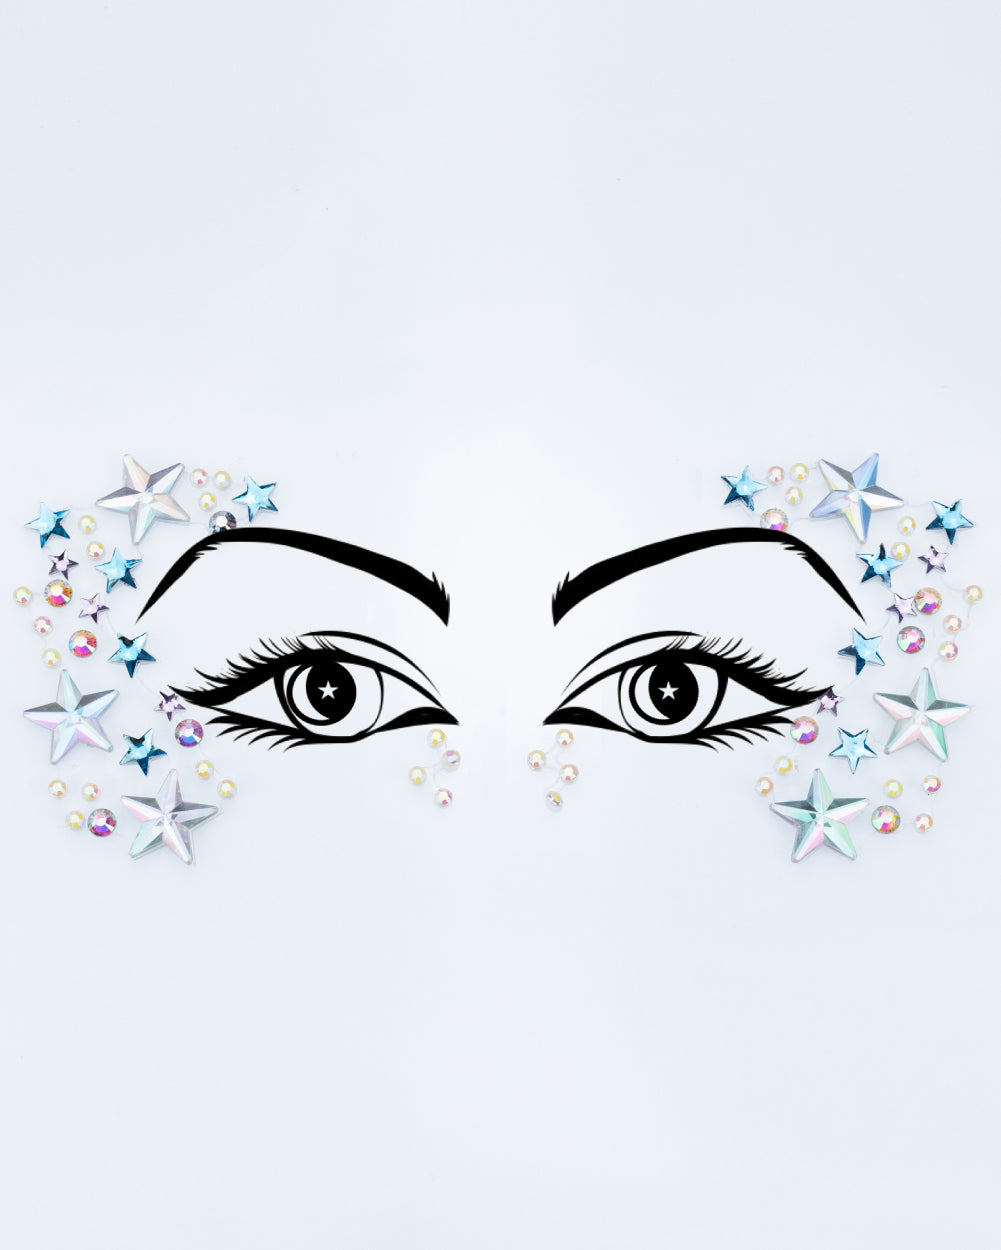 Glitter Face Jewelry Face Jewels Stickers Makeup Tools Eye Style  Rhinestones